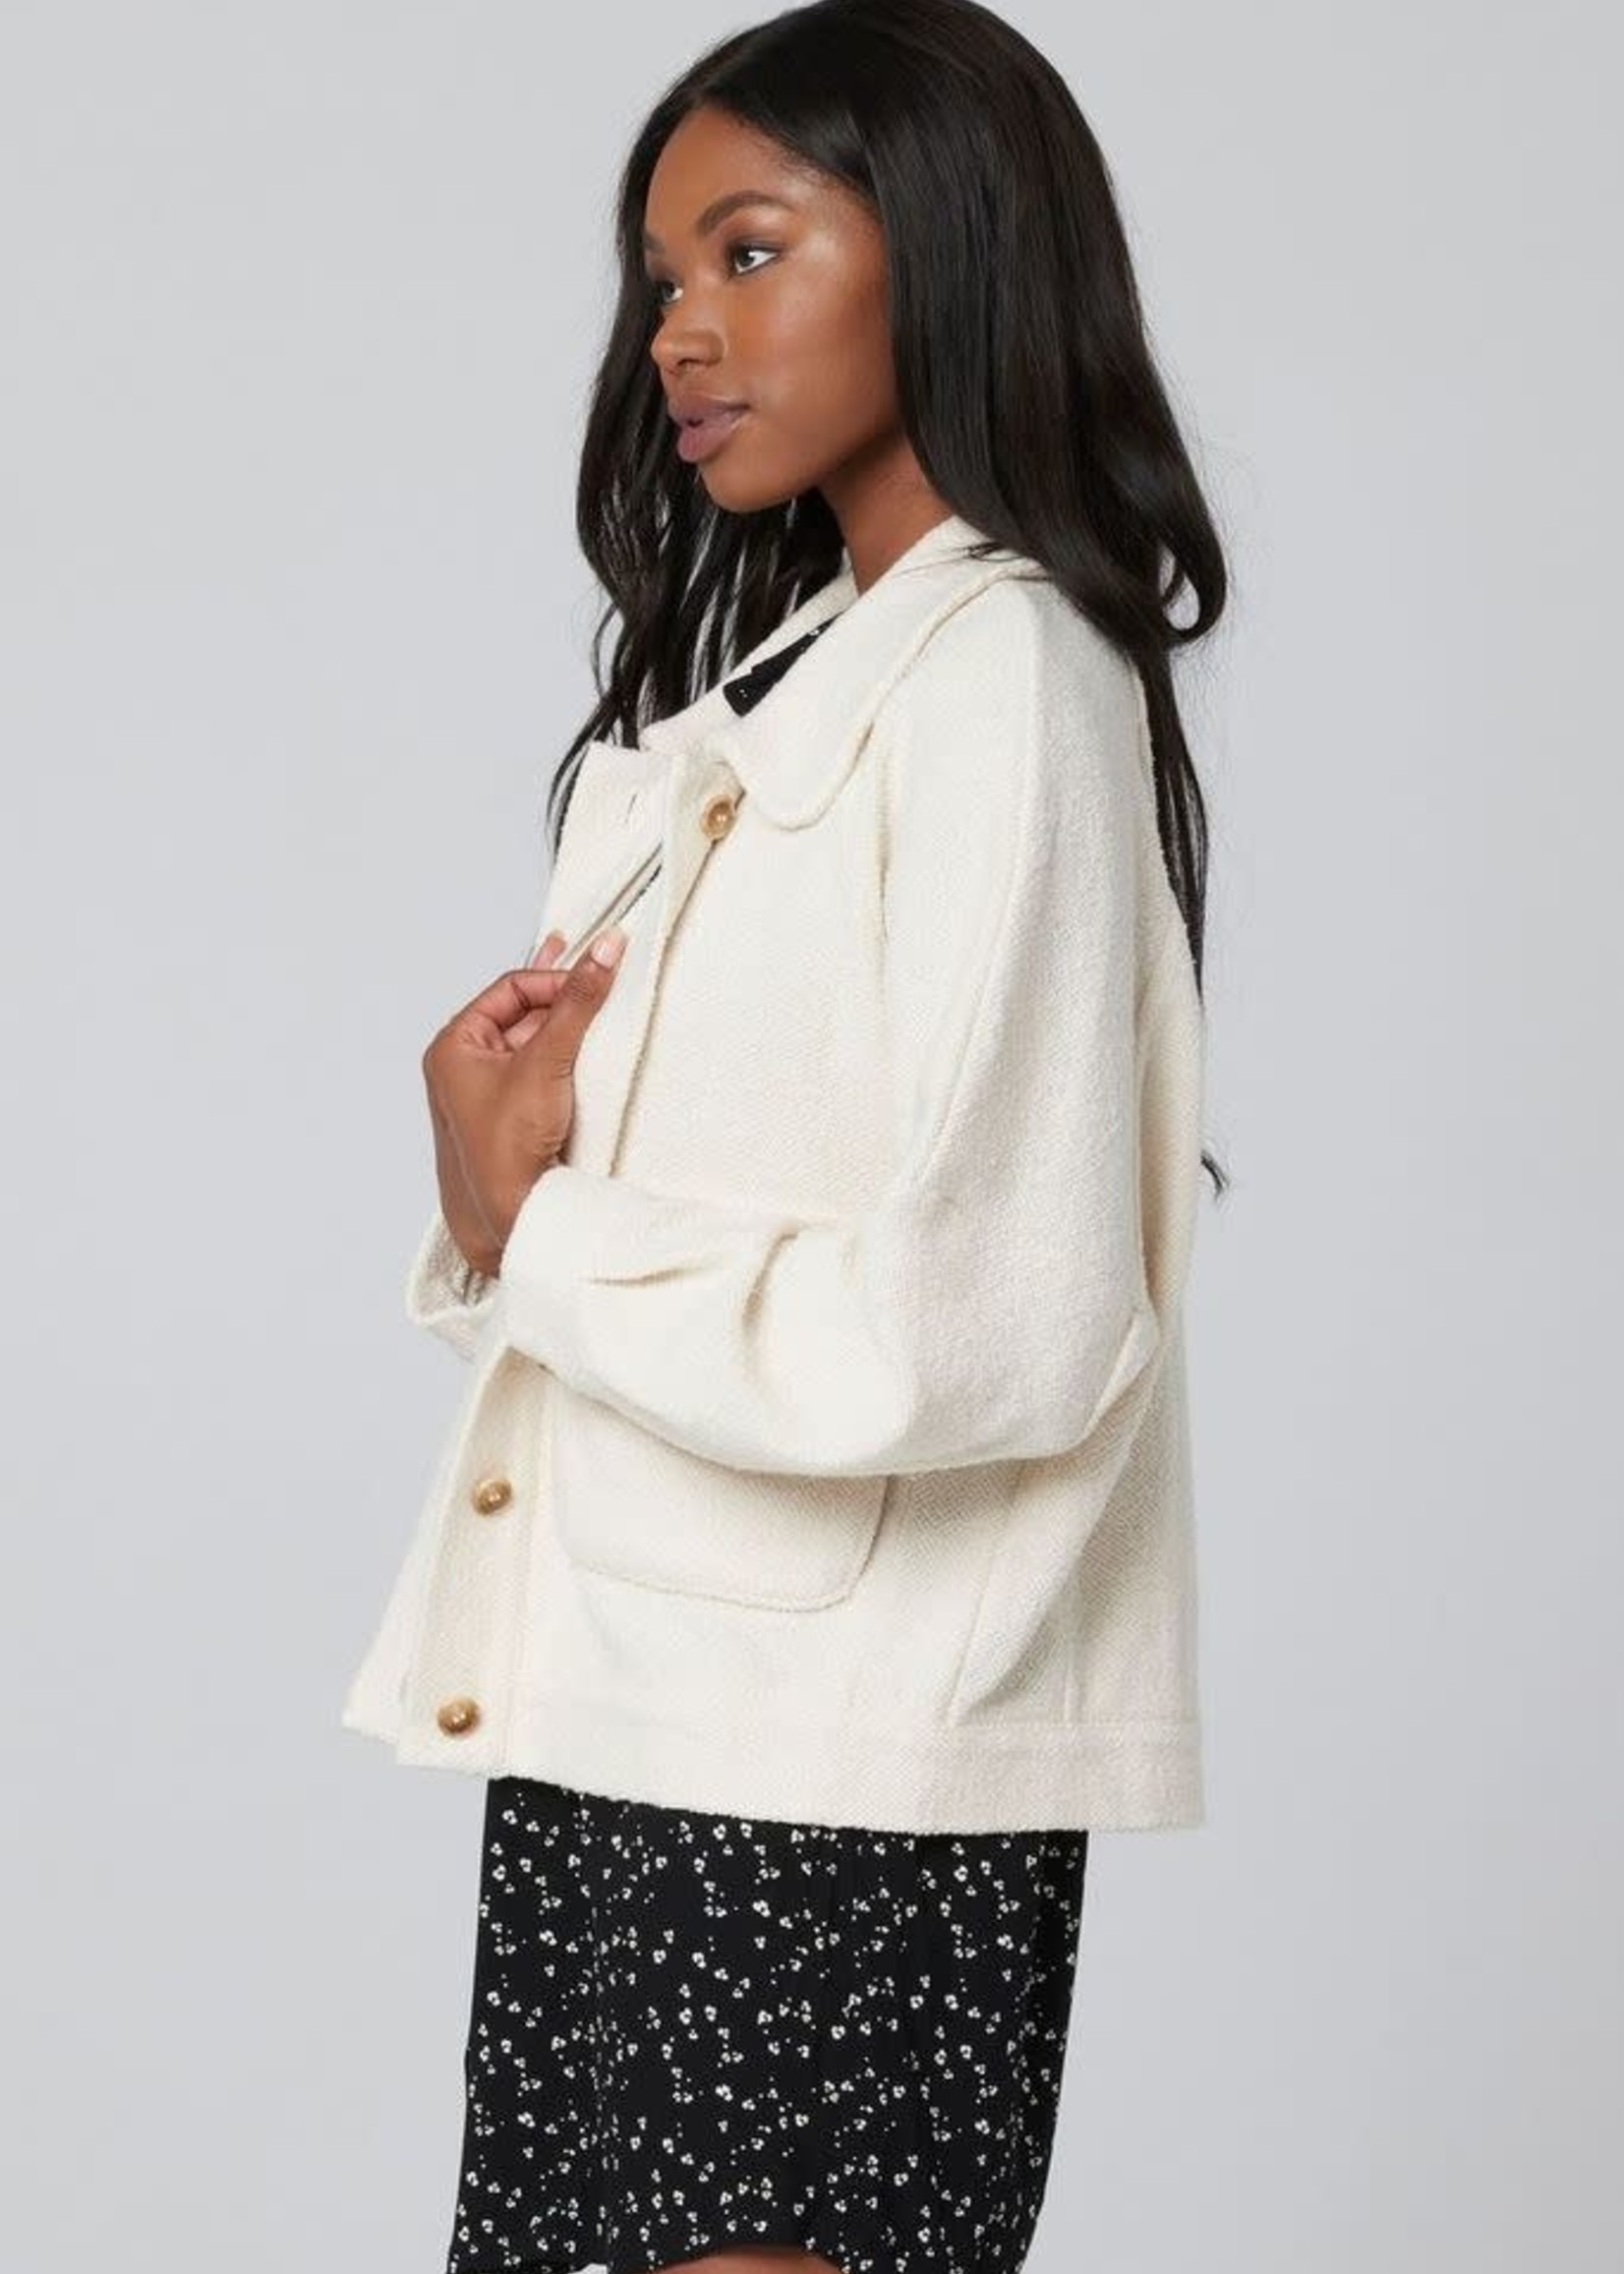 Saltwater Luxe Asher Jacket